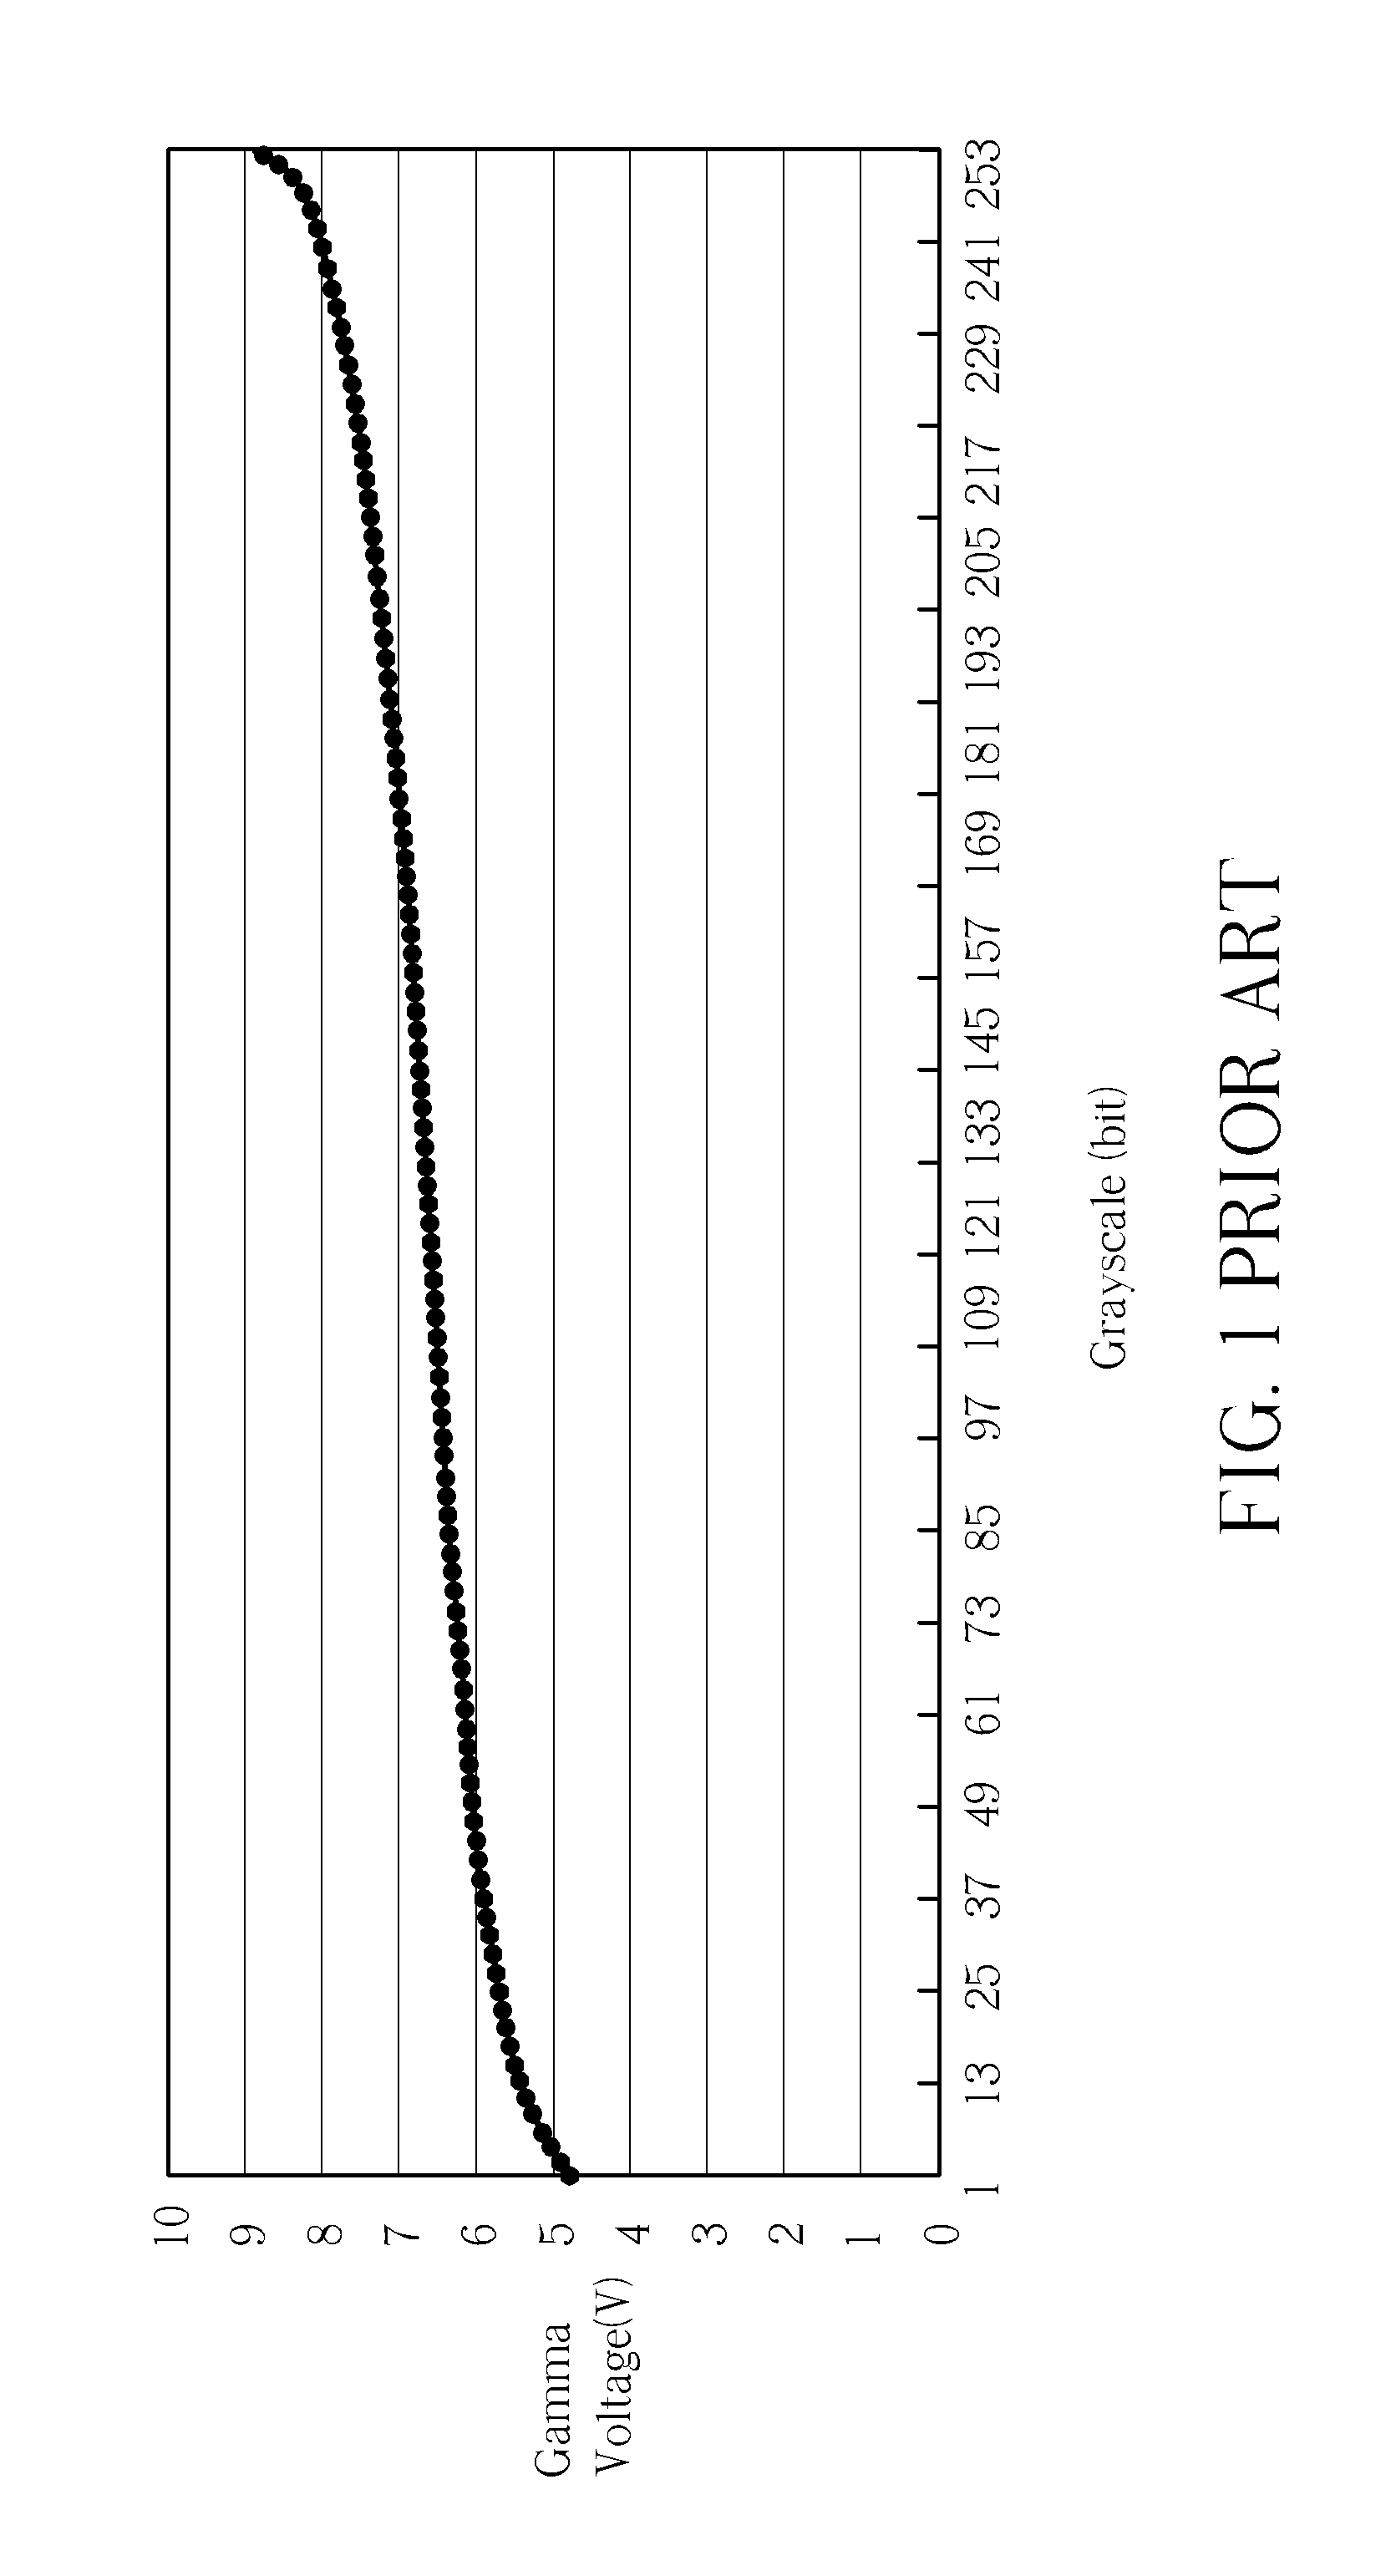 Method and Device for Mapping Input Grayscales into Output Luminance